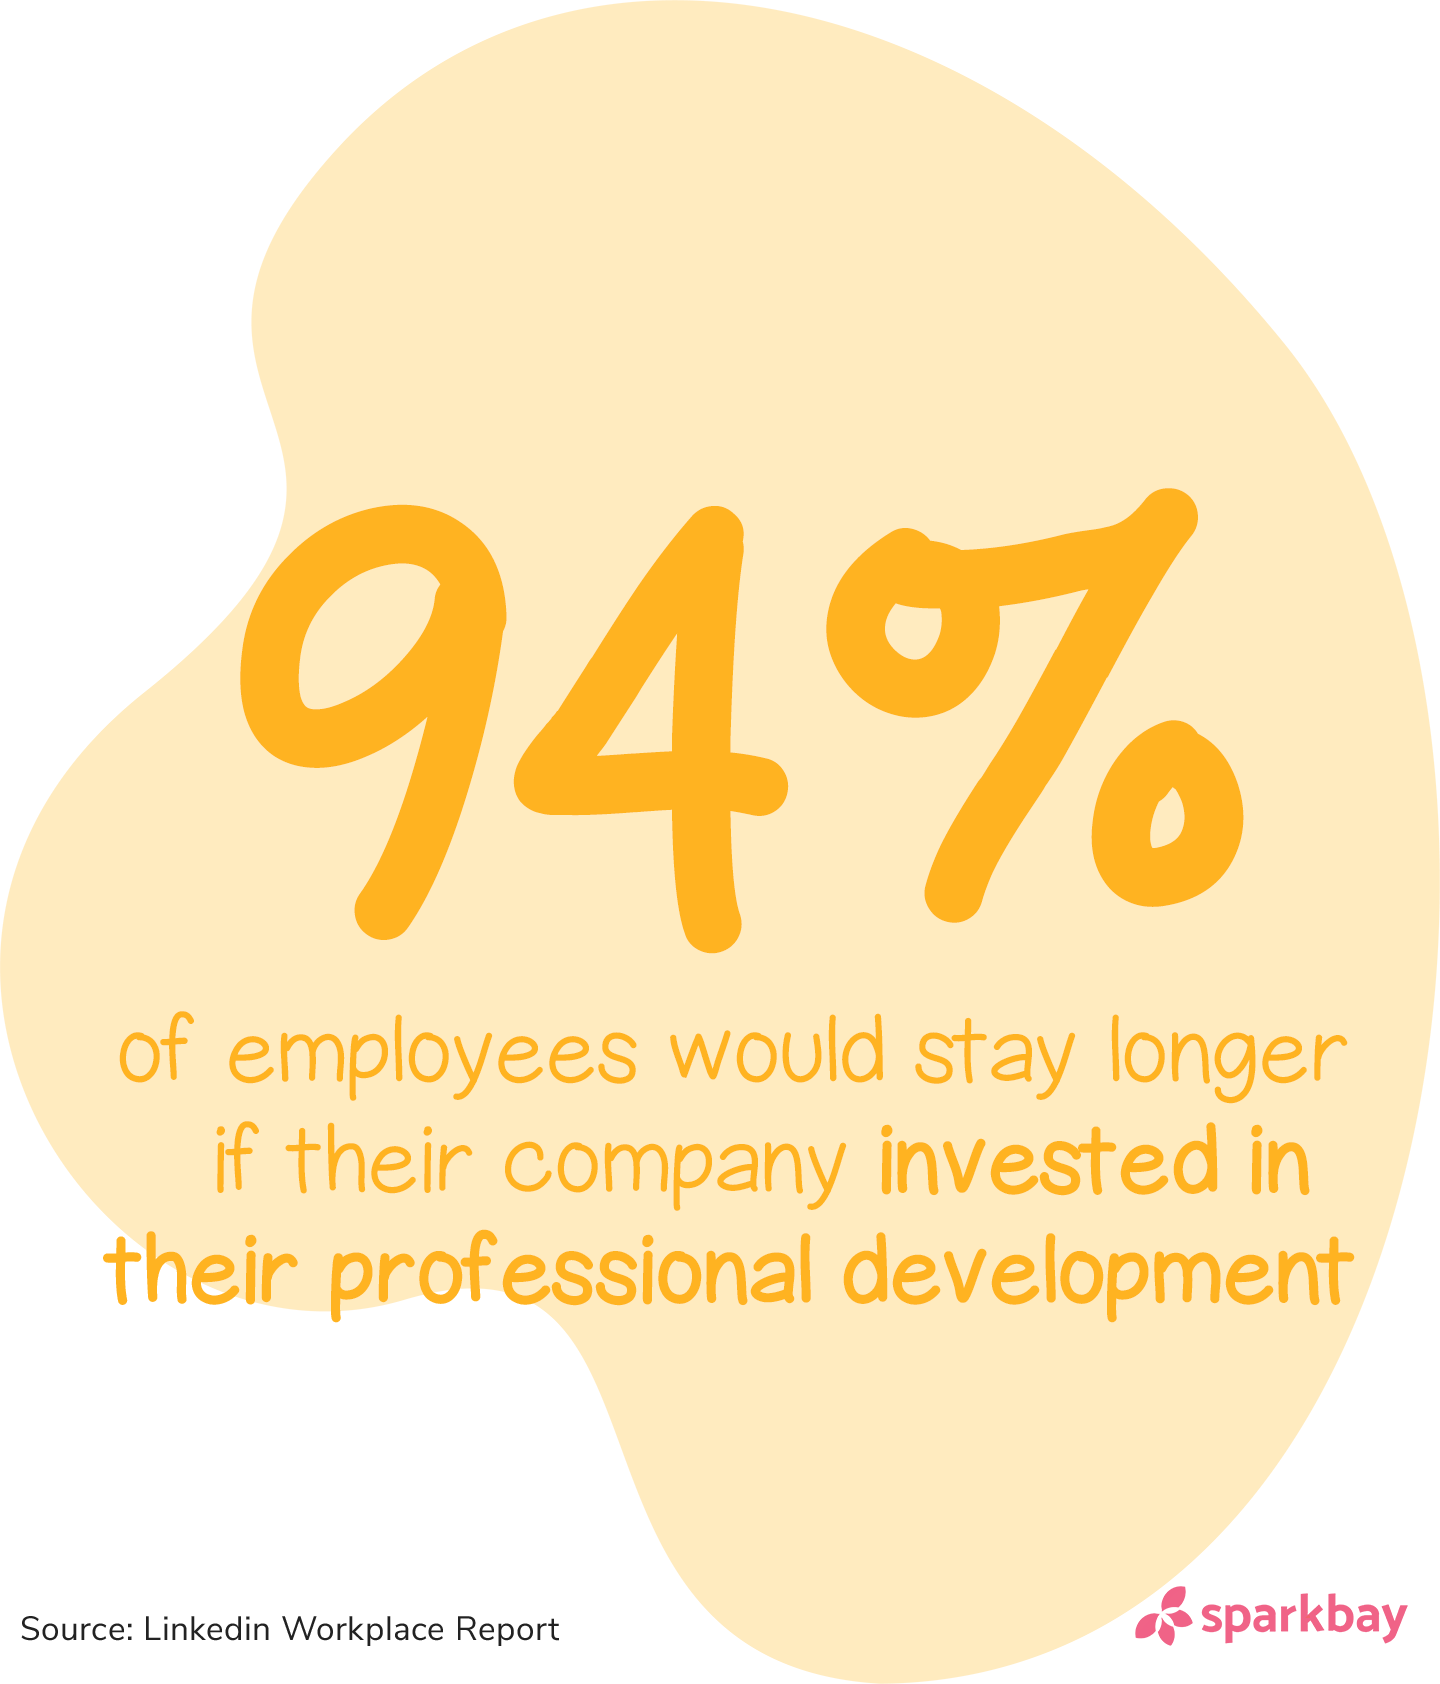 Profesionnal development statistics: 94% of employees would stay at a company longer if it invested in their professional development.